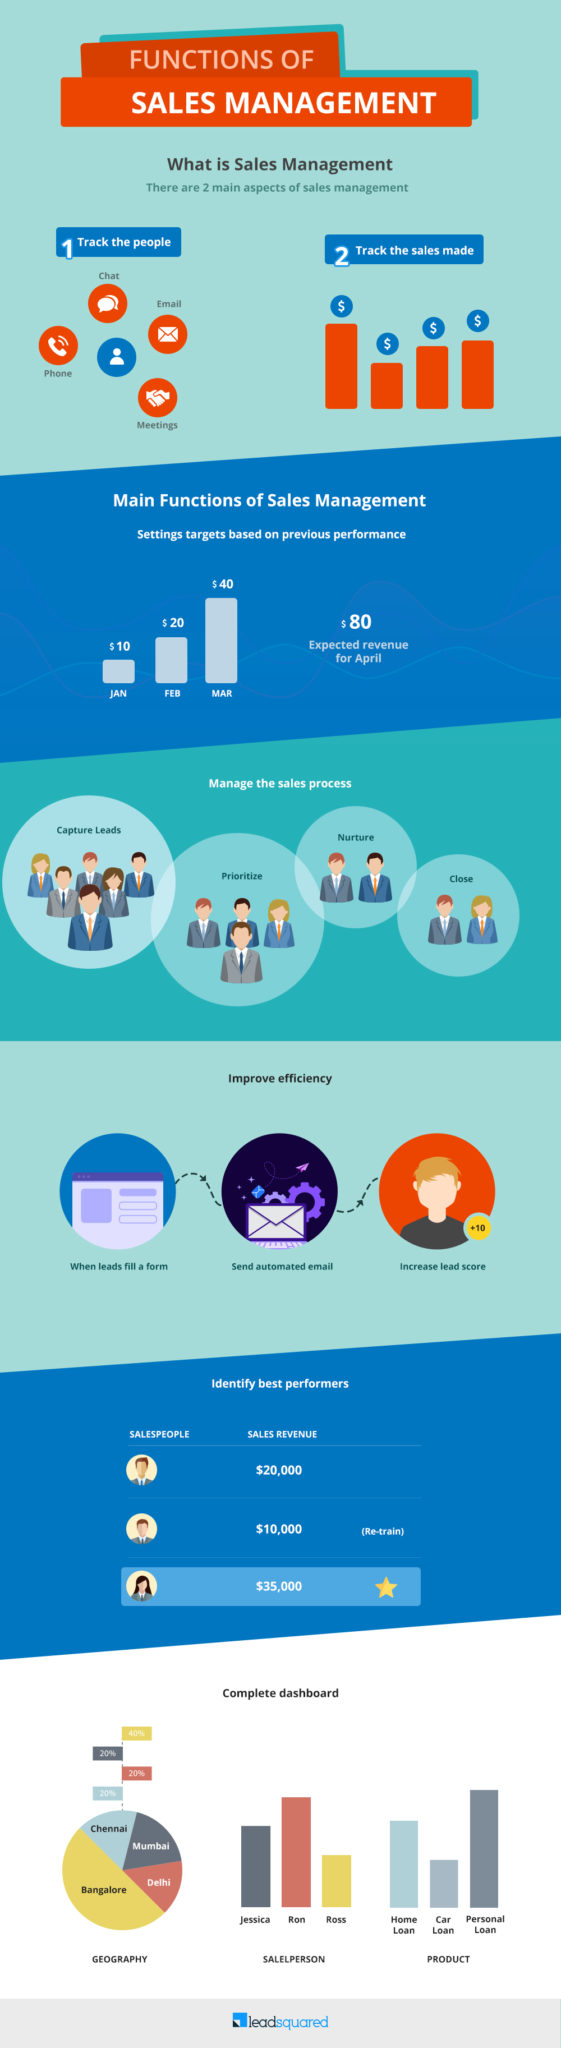 Funtions of sales management - infographic